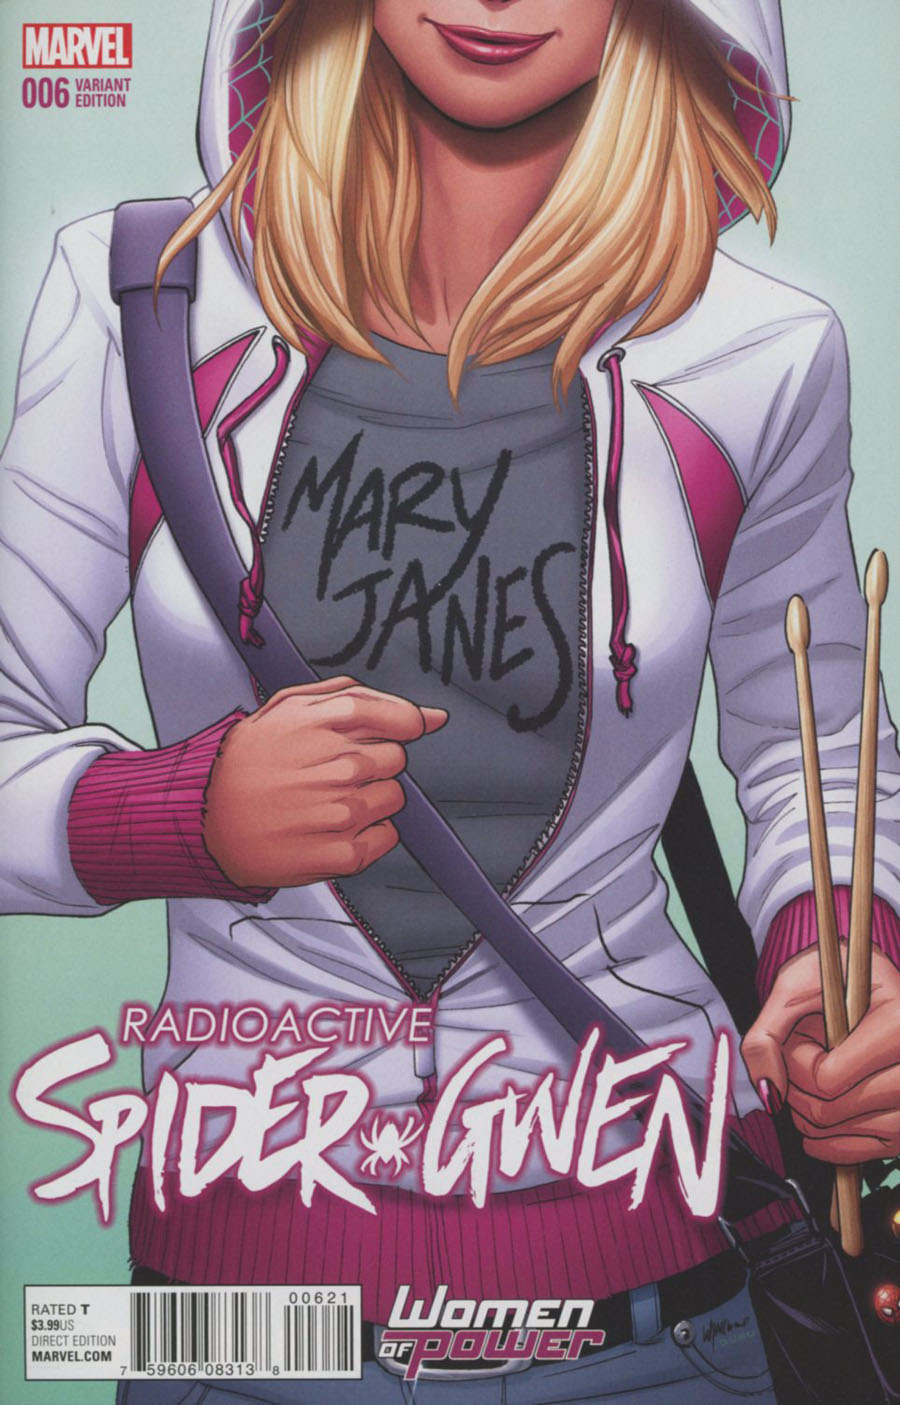 Spider-Gwen Vol 2 #6 Cover B Variant Emanuela Lupacchino Women Of Power Cover